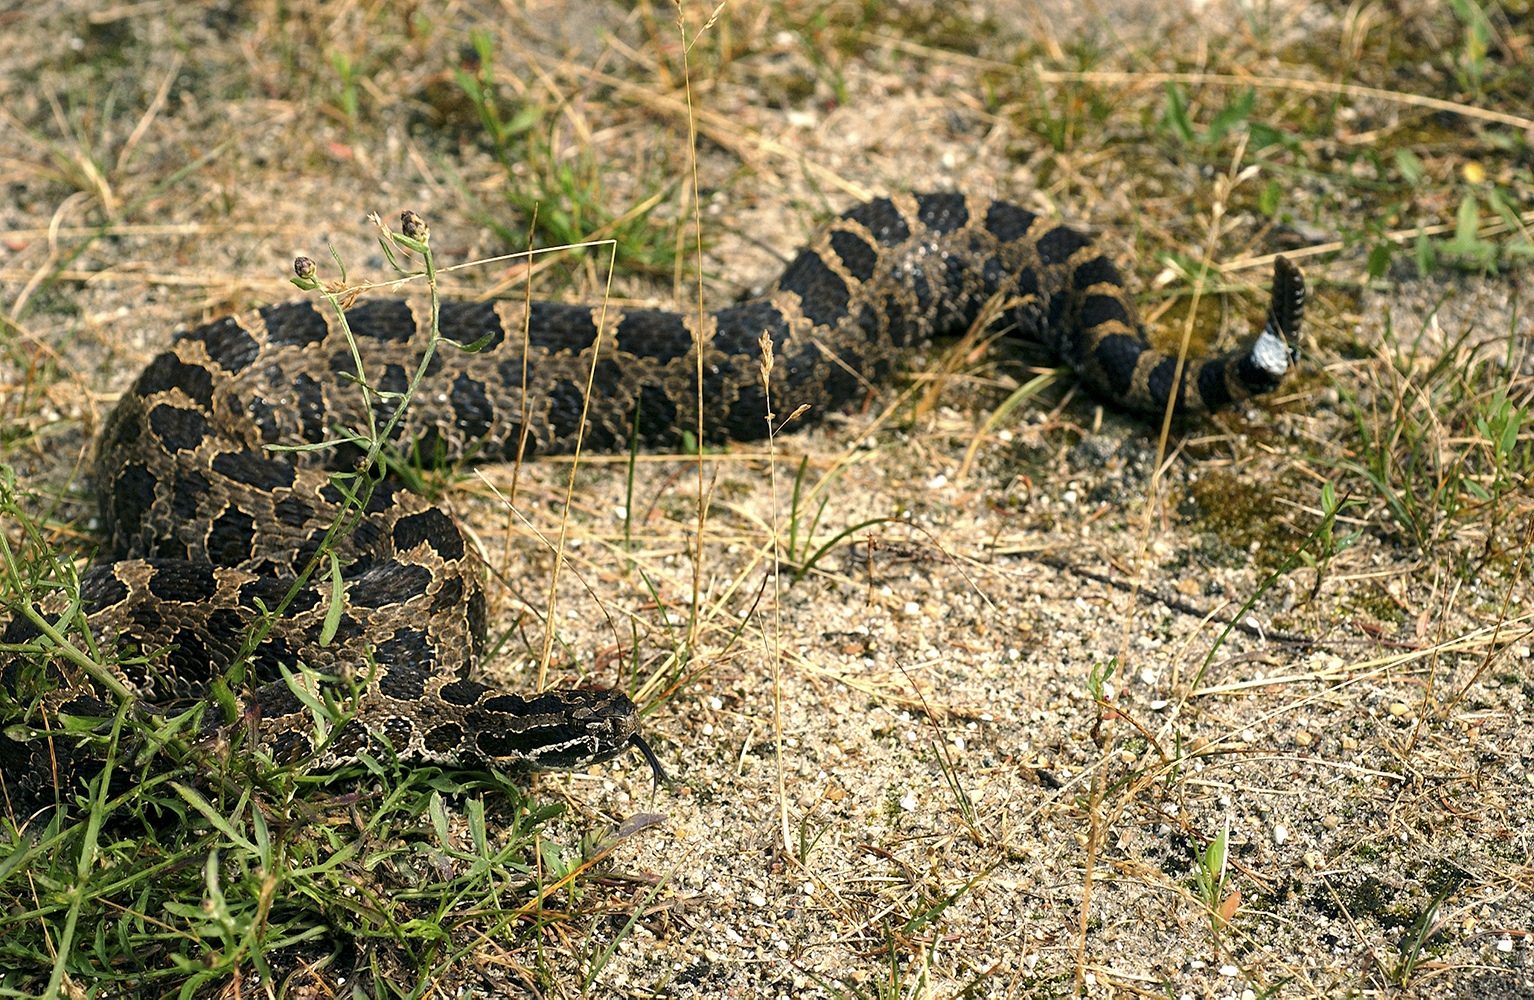 The massasauga rattlesnake is Michigan’s only poisonous snake